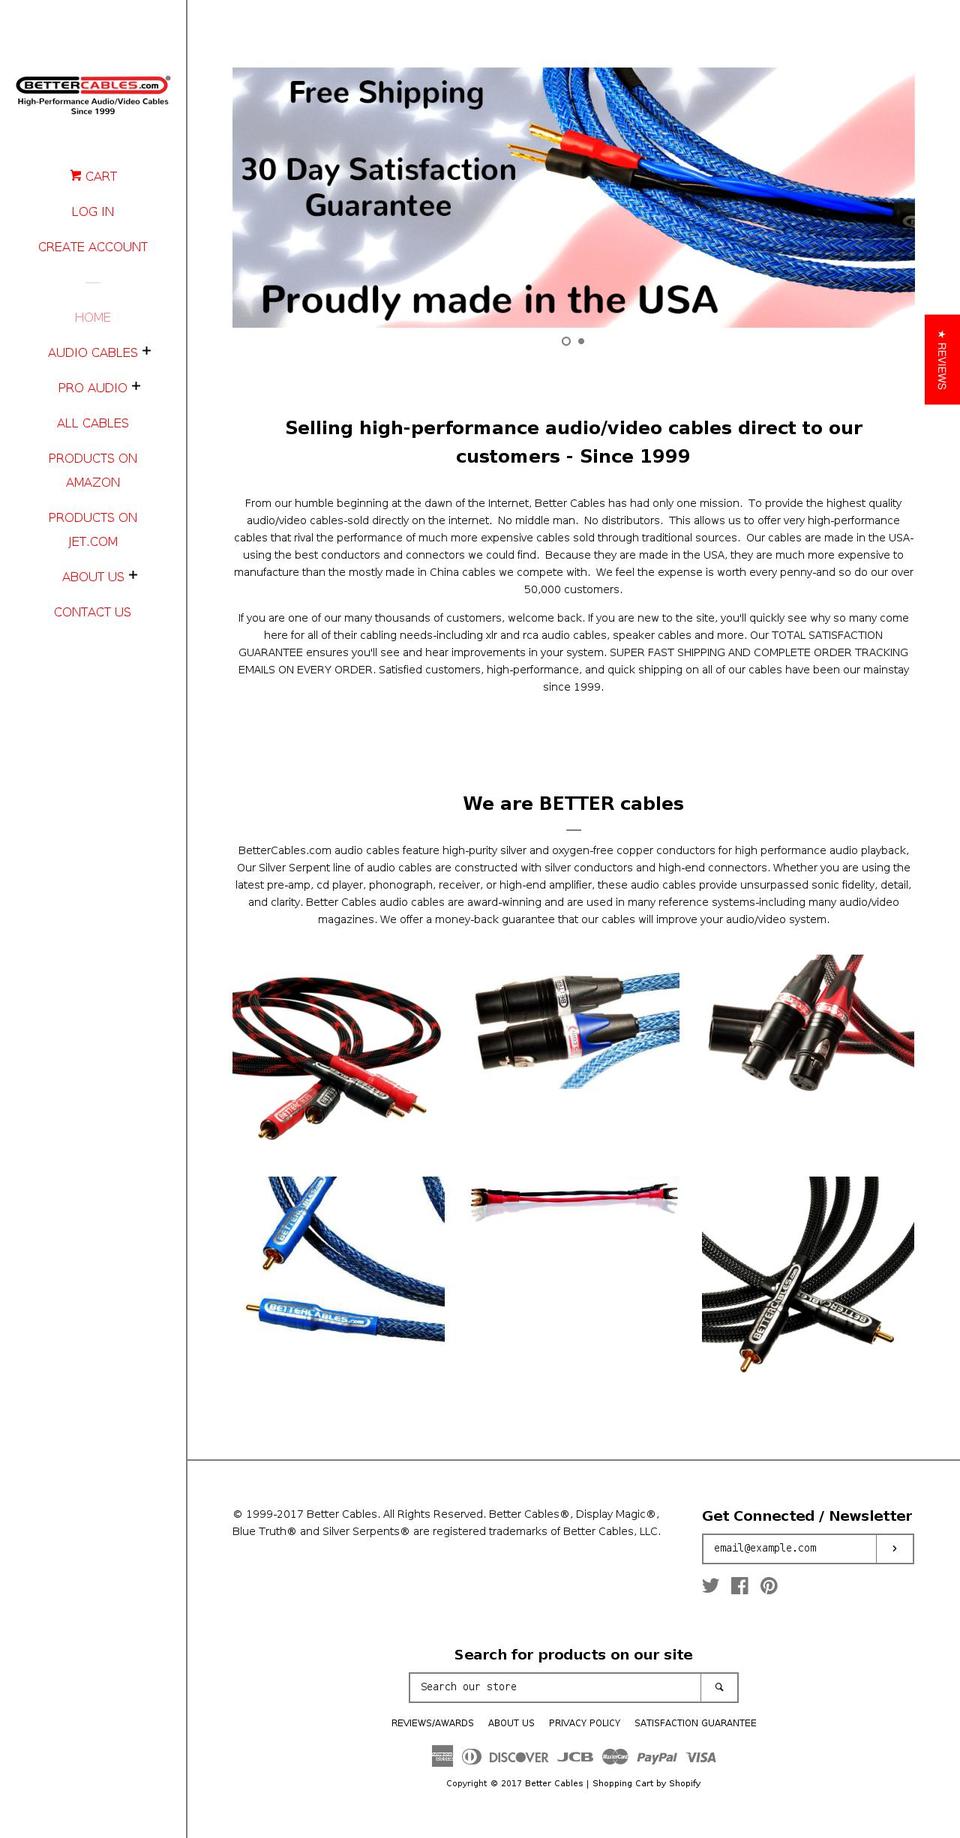 Current Theme - Pop Shopify theme site example bettercables.co